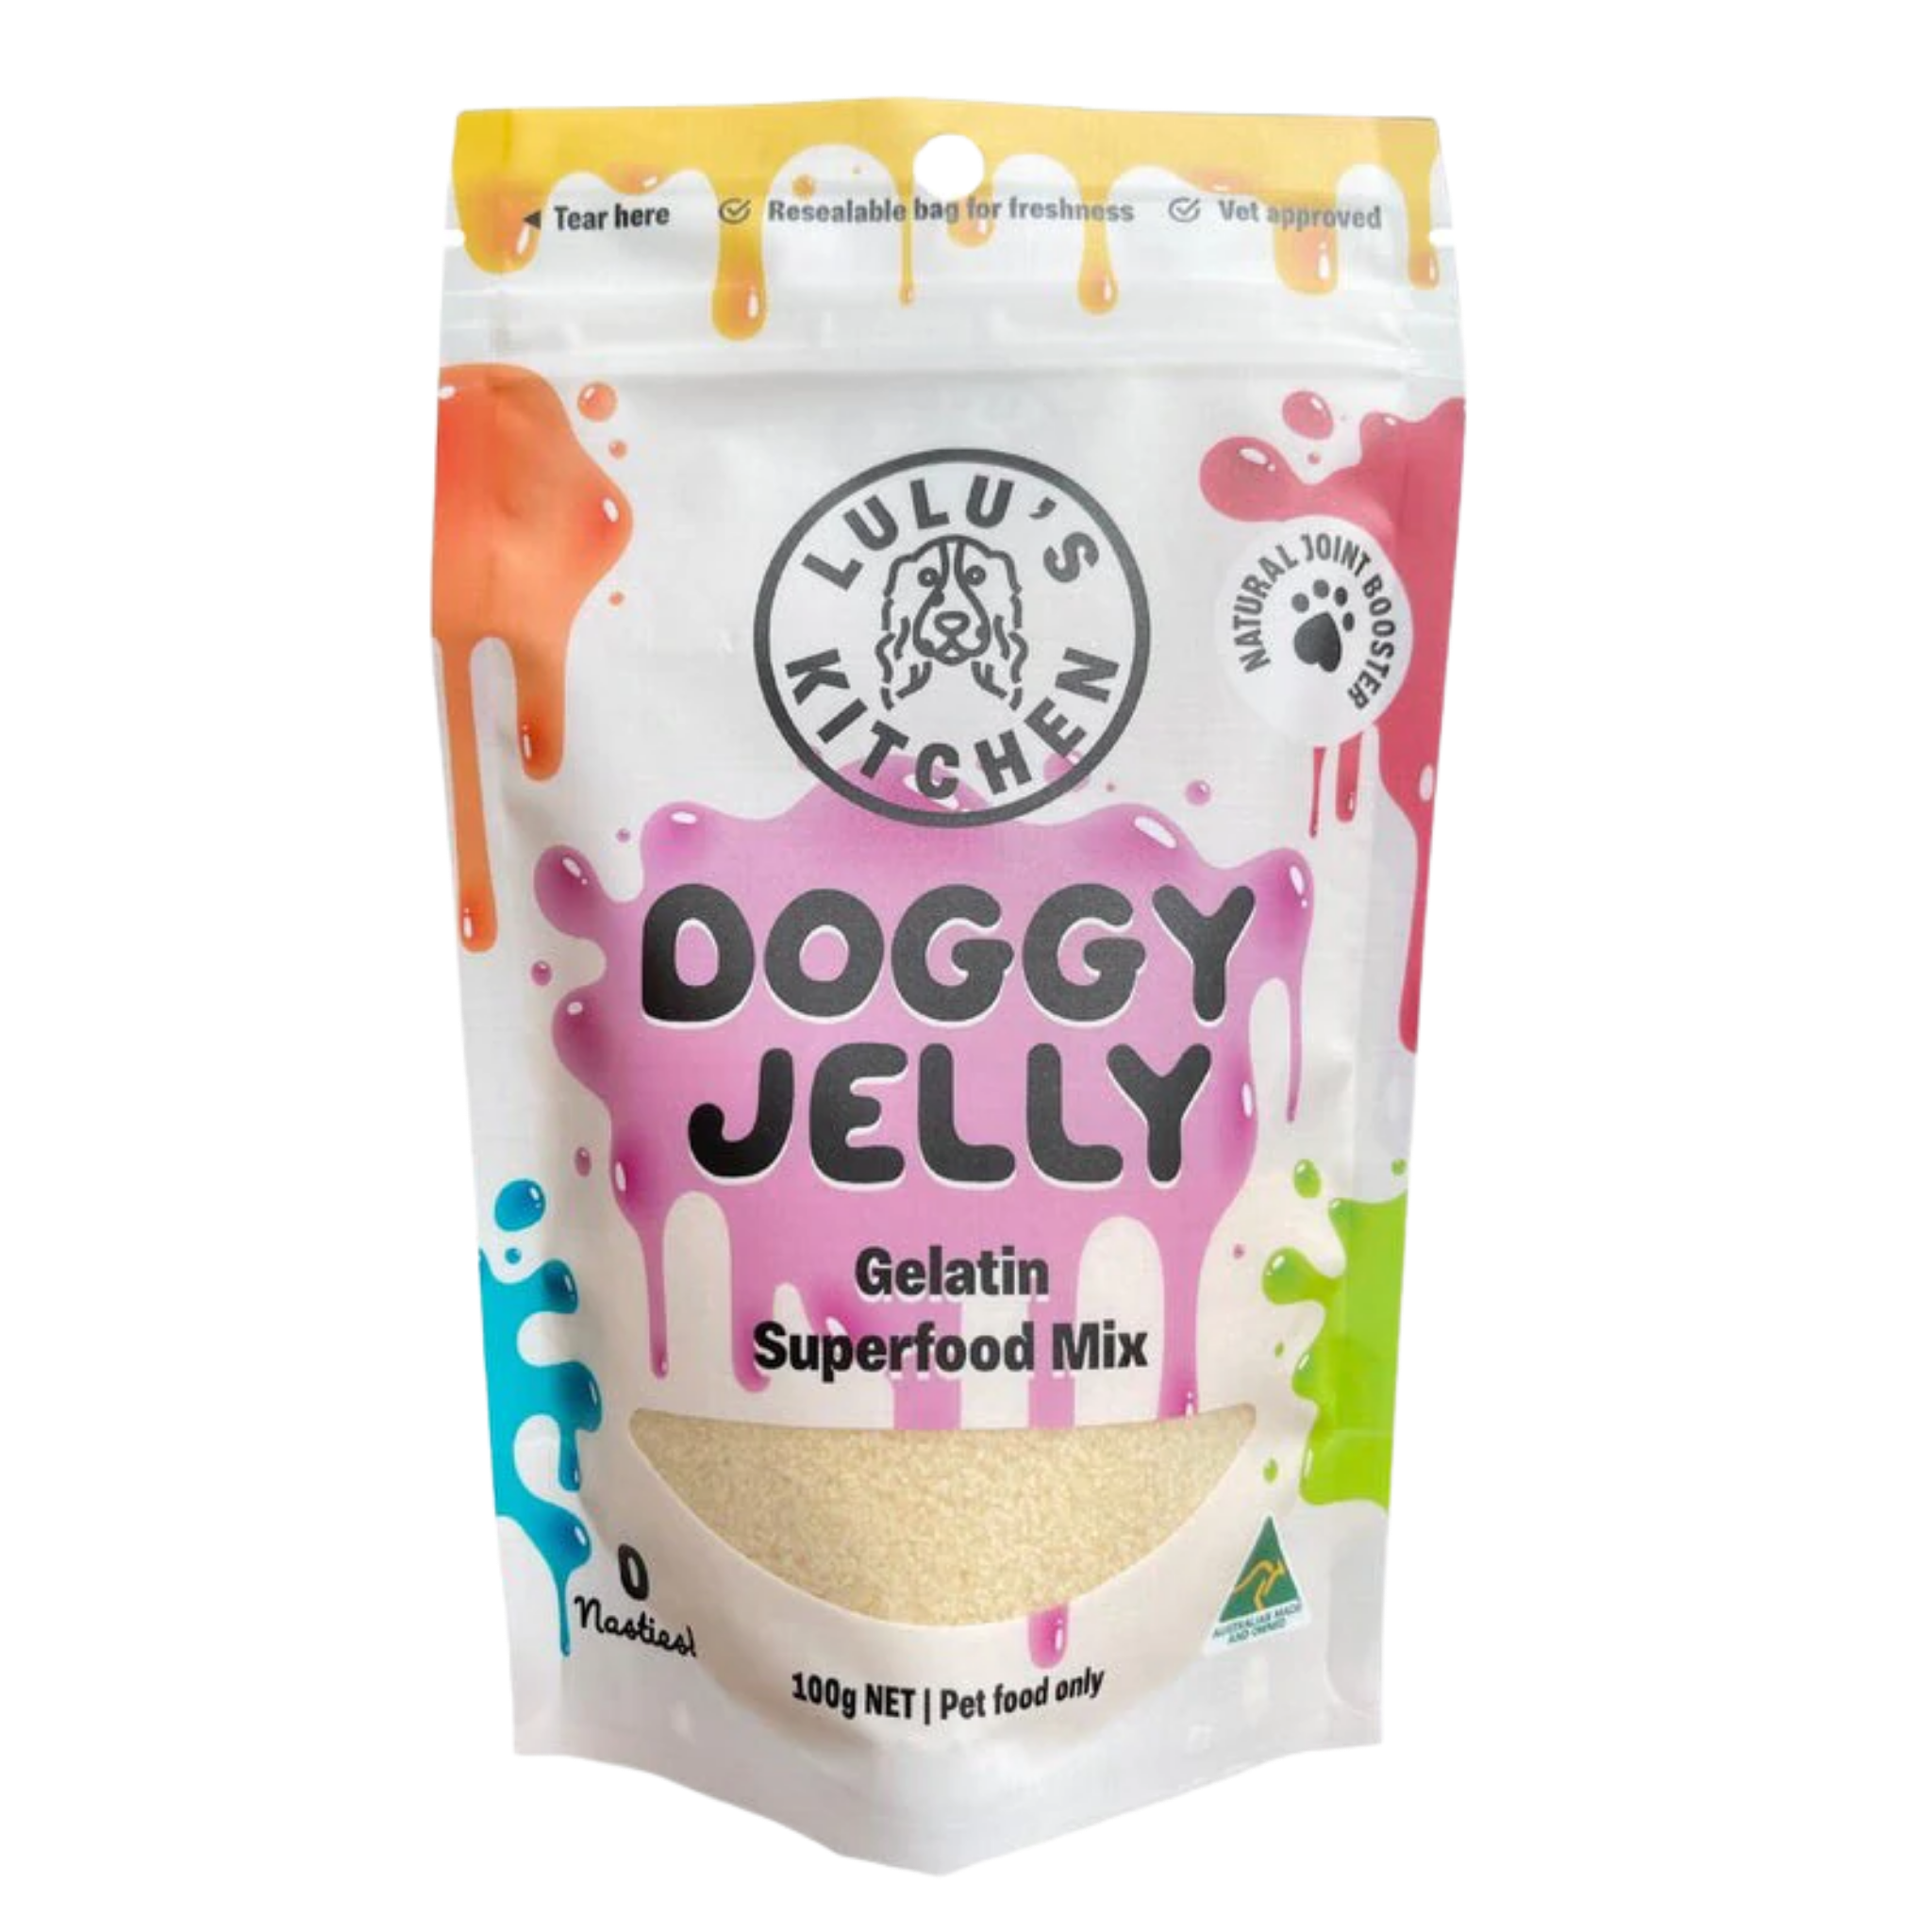 Doggy Jelly | Unflavoured Superfood Jelly